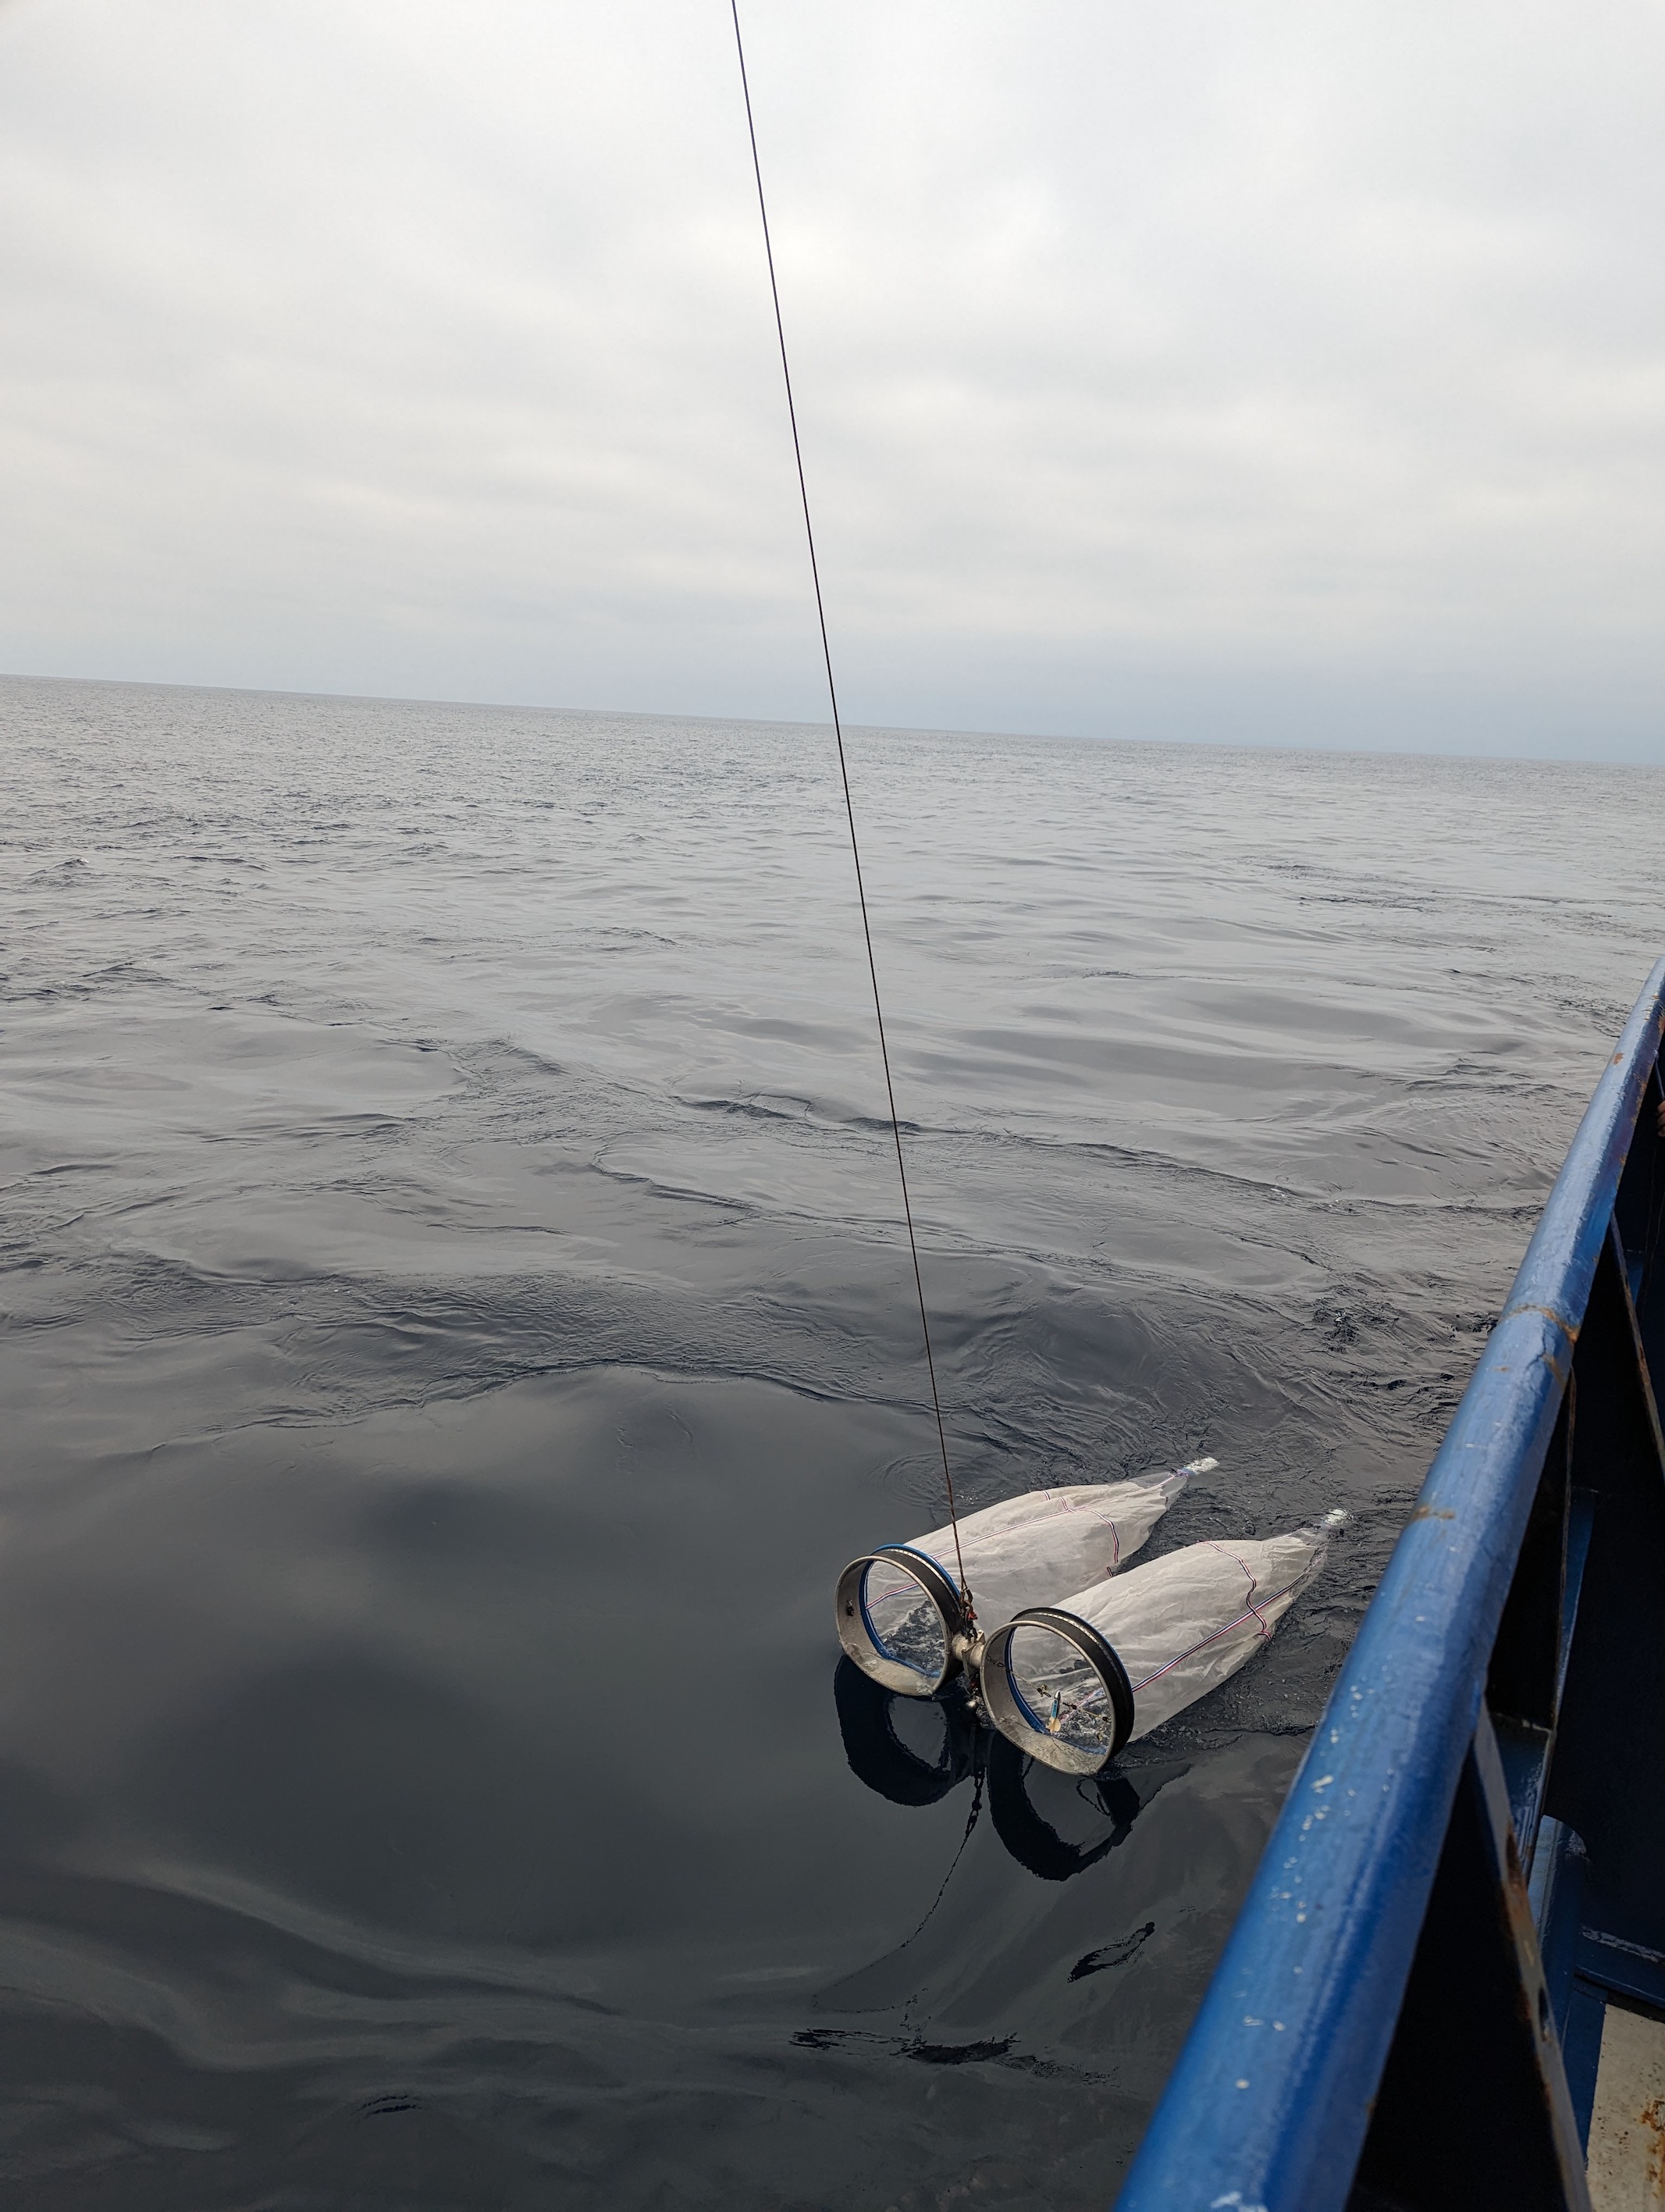 paired Bongo-style nets lowered into the ocean via winch.